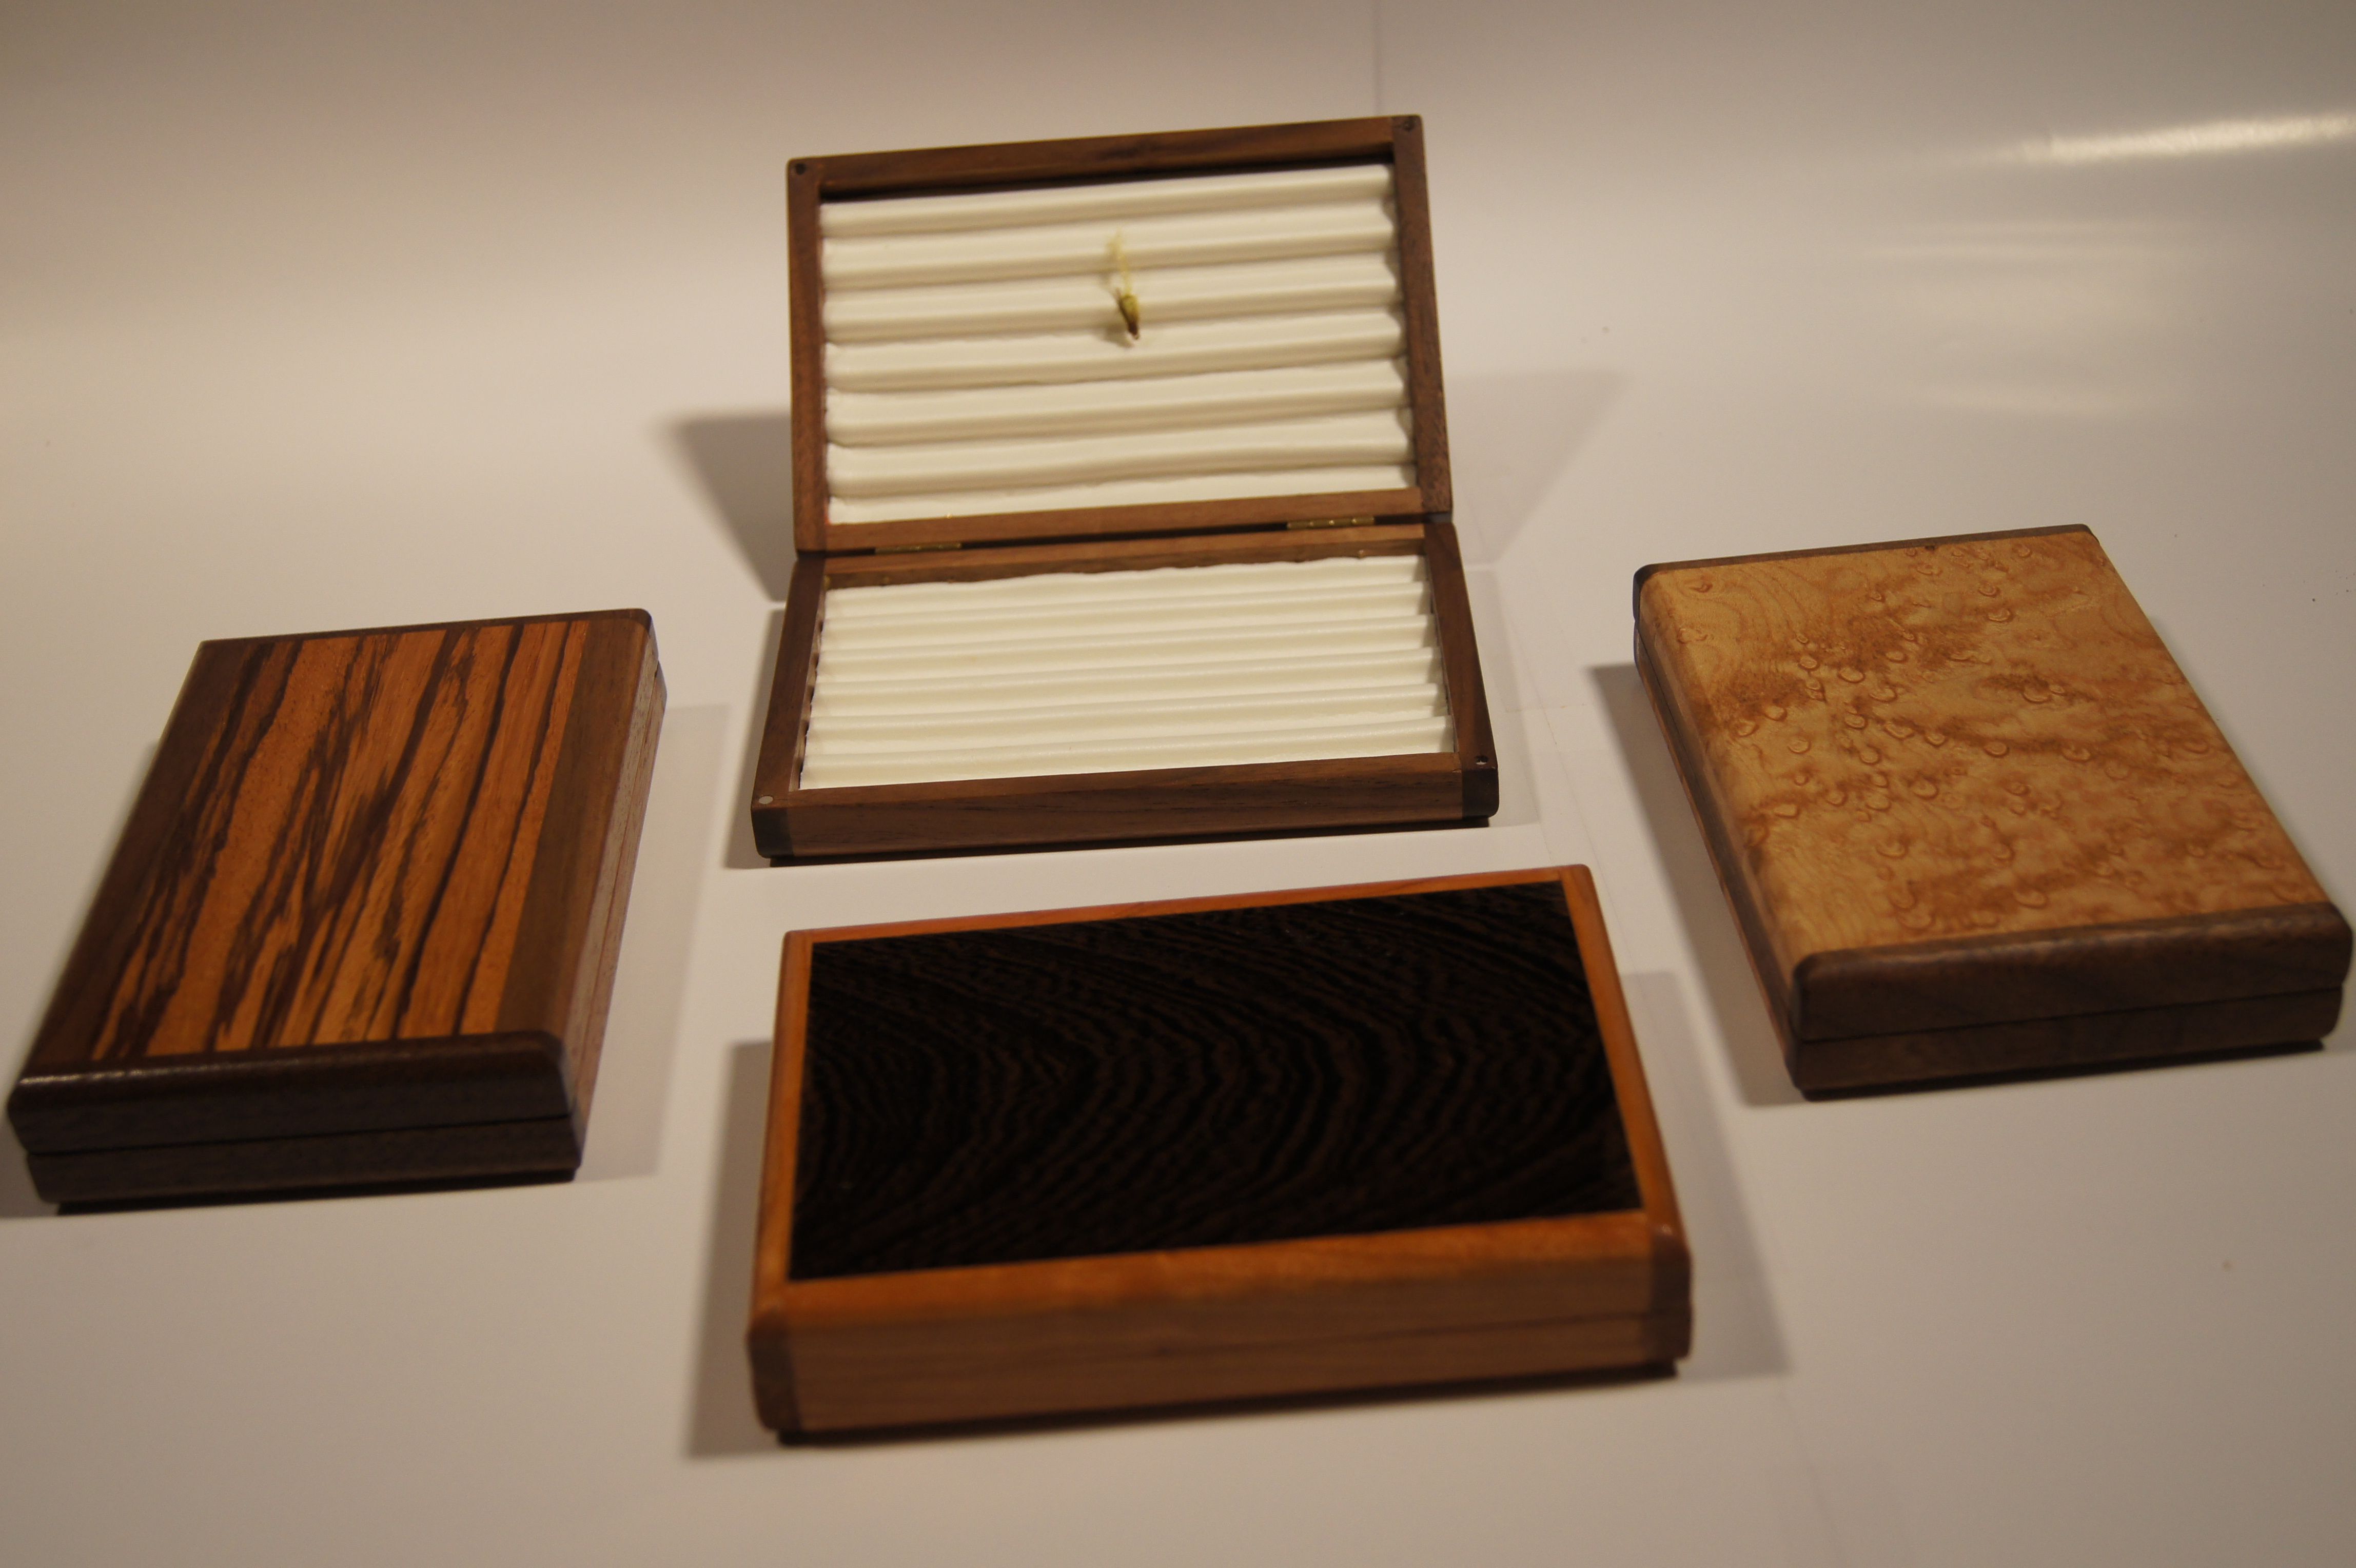 Fly Fishing Boxes  Wood box design, Fly box, Wooden box crafts